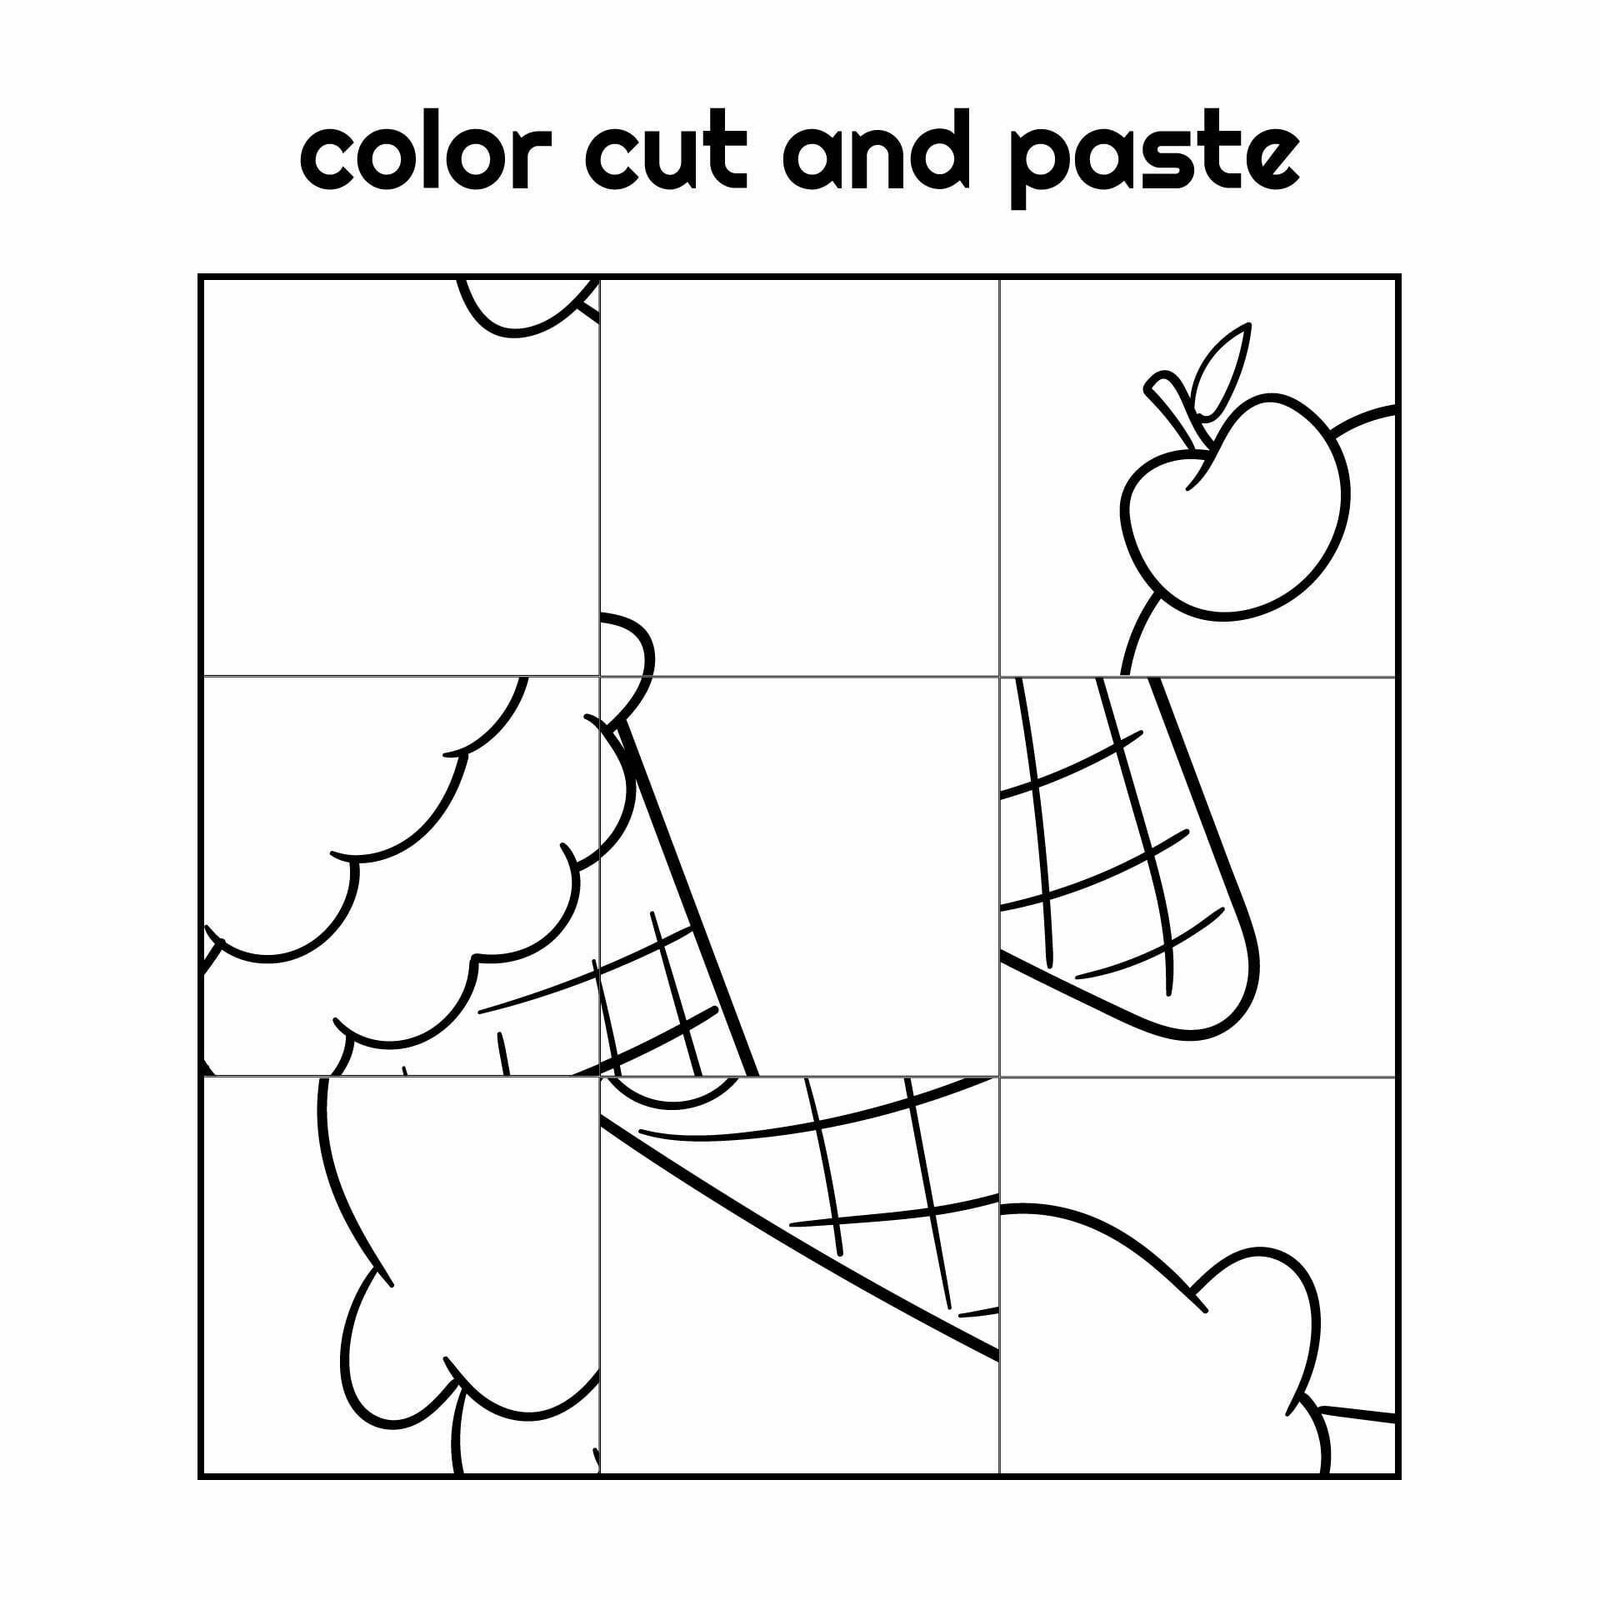 9 Best Images of Cut And Paste Printables - Spring Cut and ...